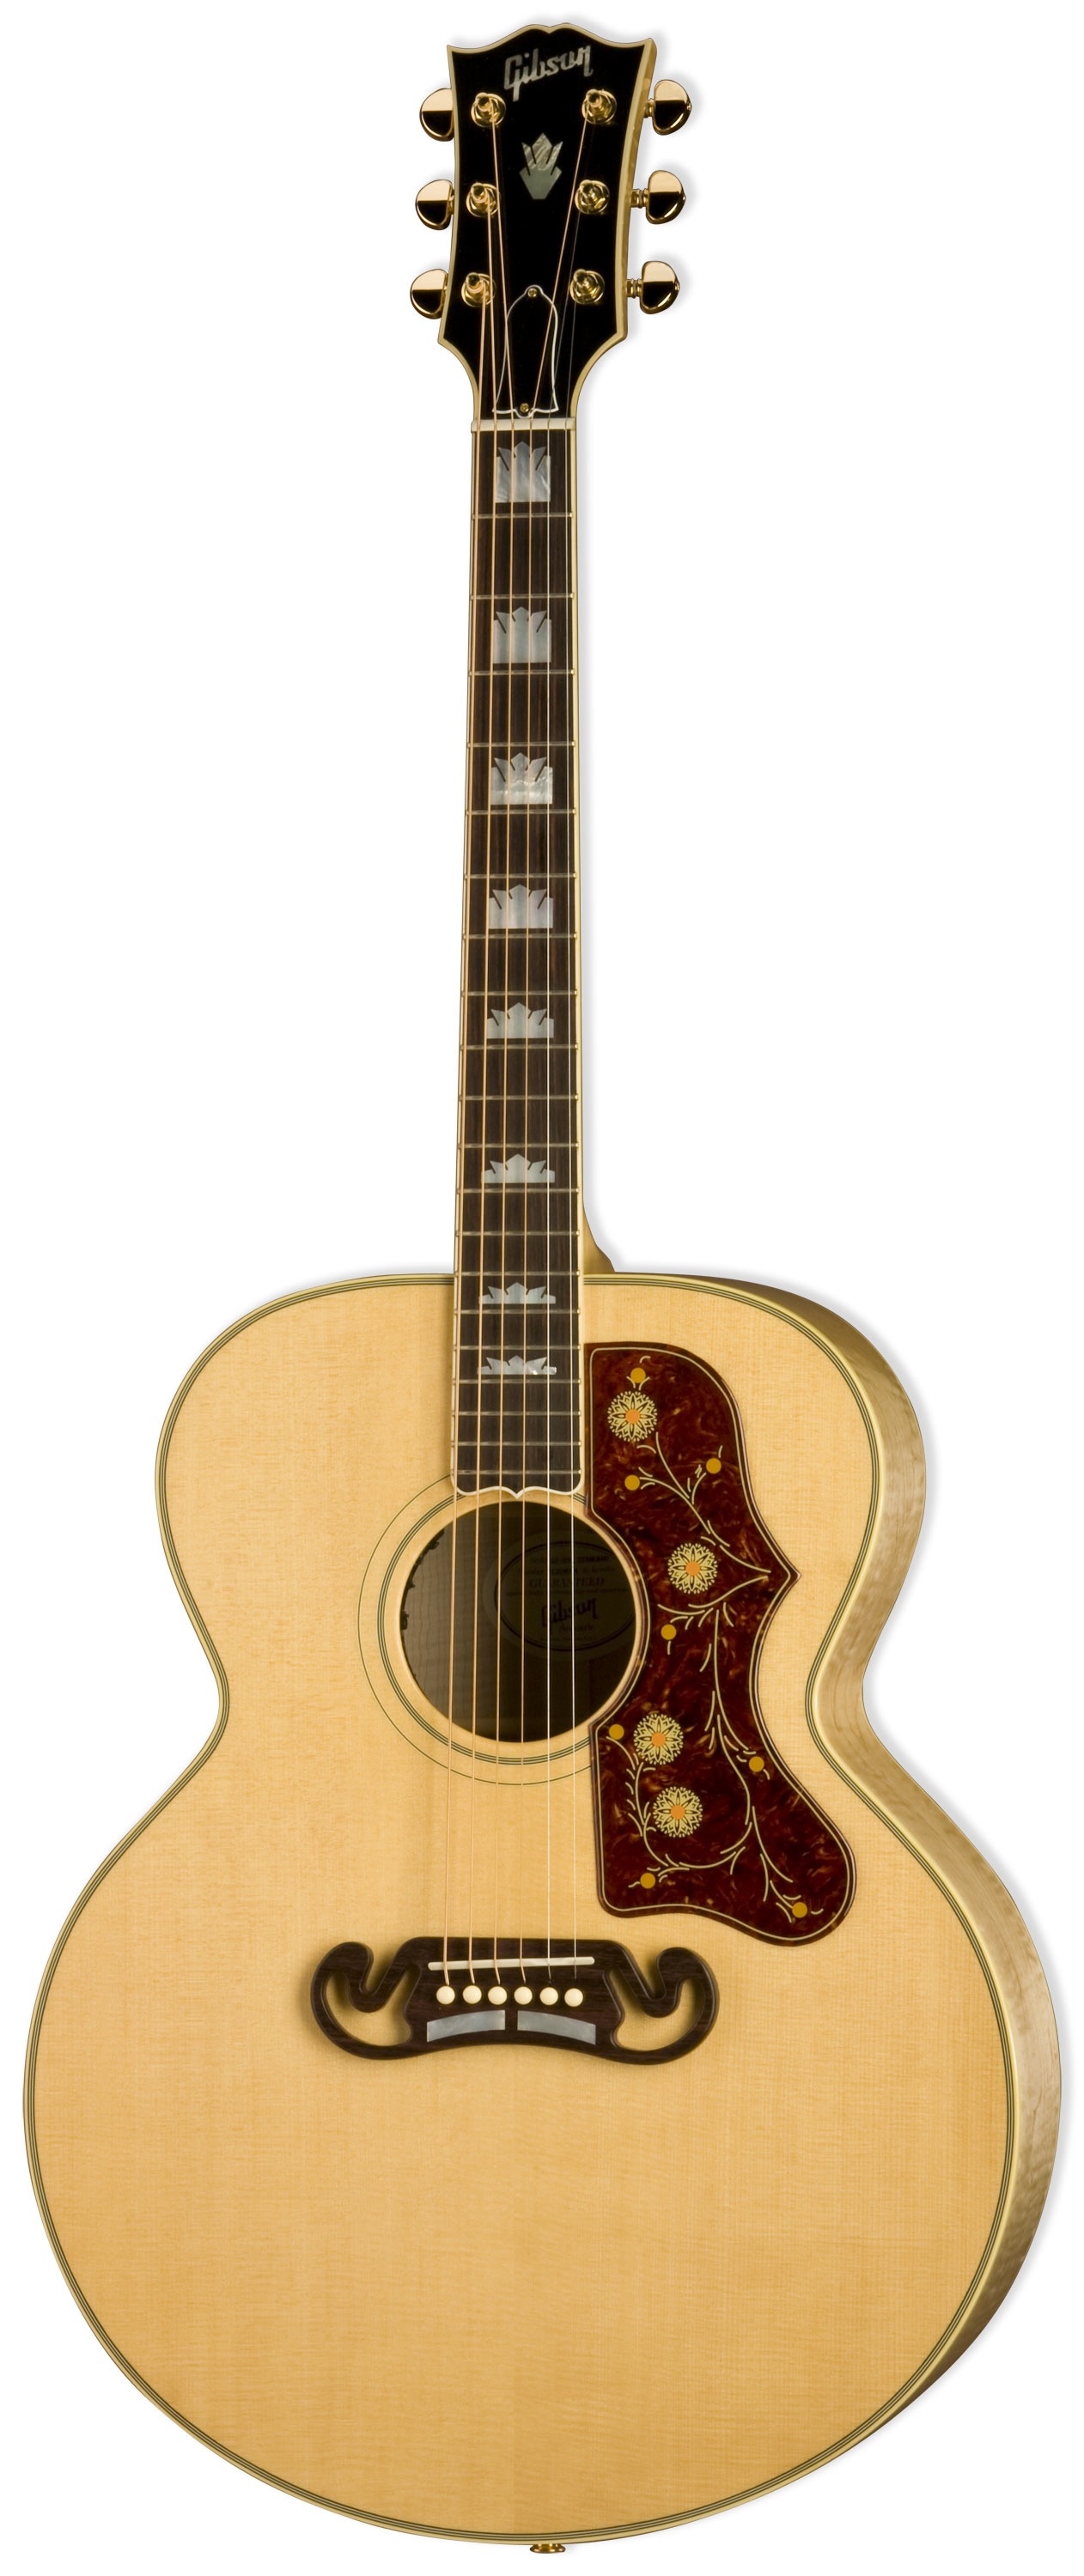 Gibson Gibson J-200 Super Jumbo Standard Acoustic-Electric Guitar - Antique Natural